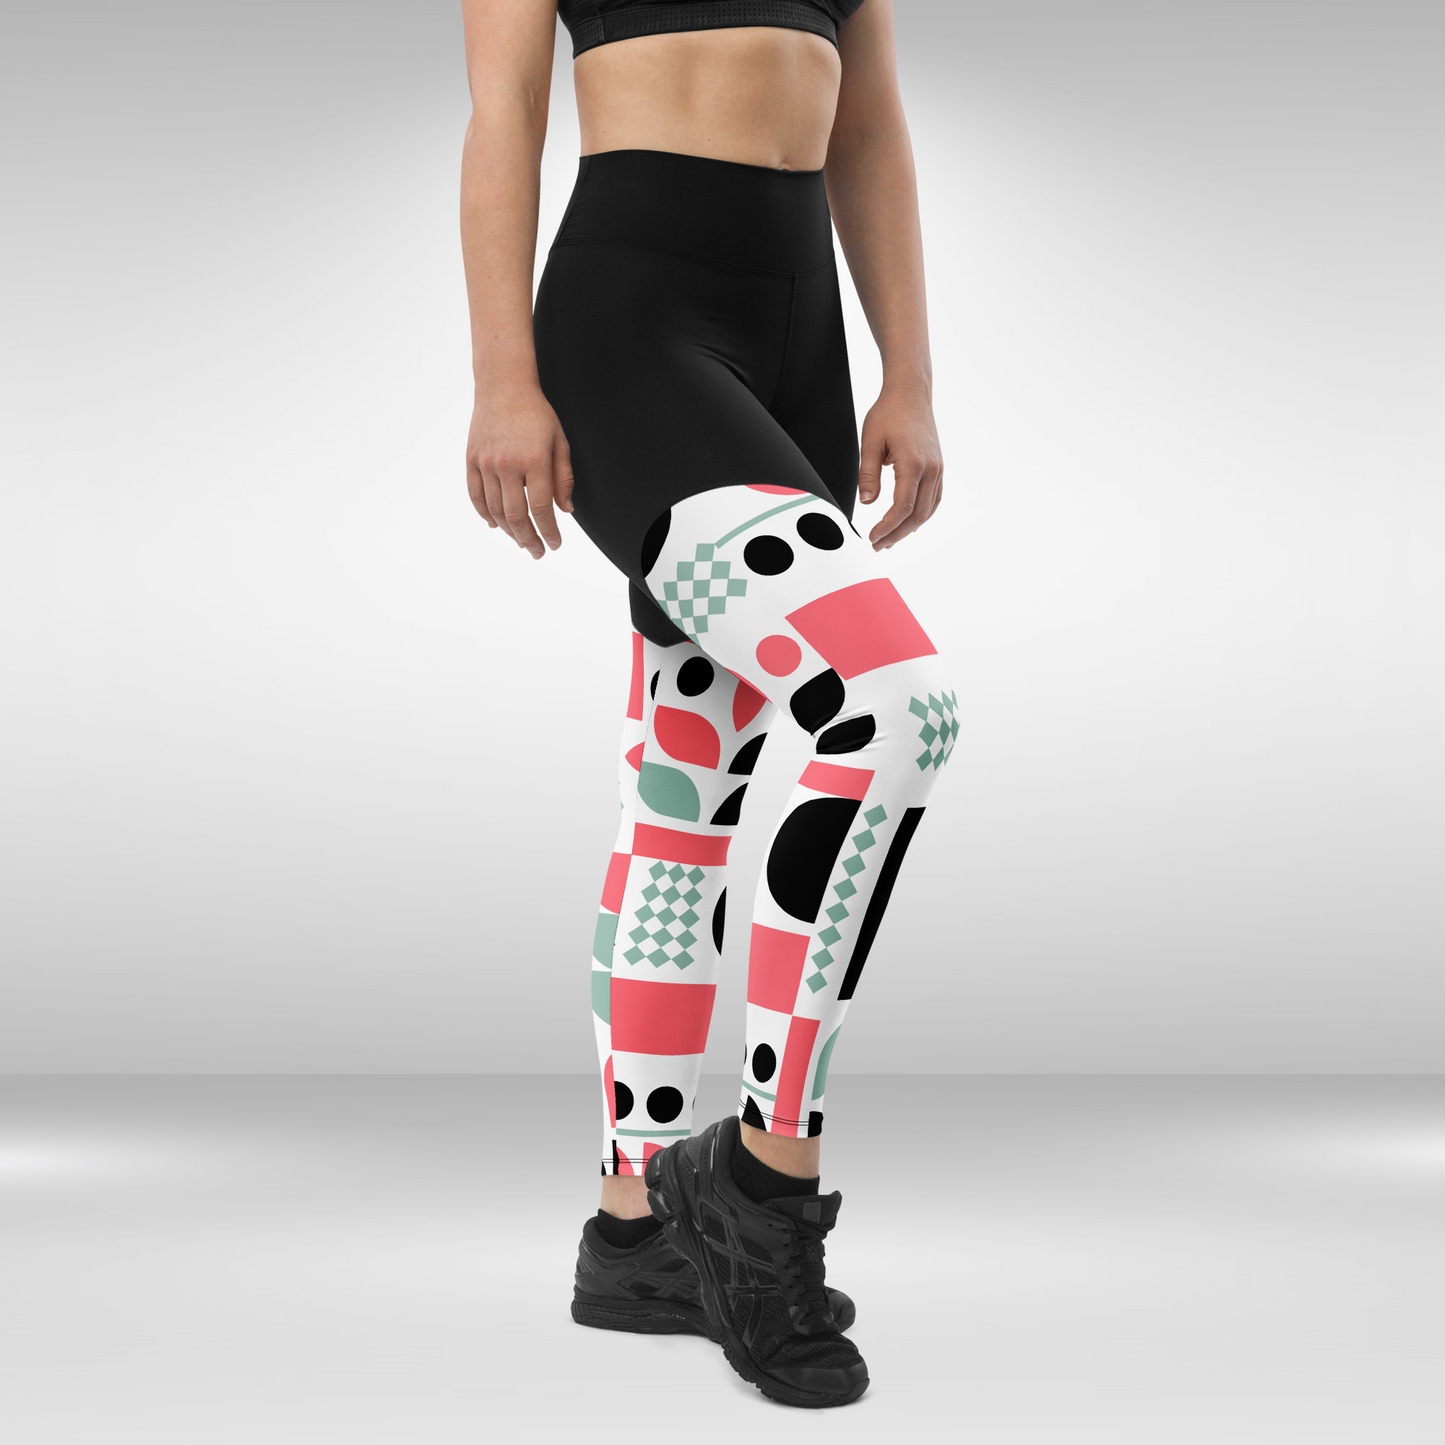 Women Compression Leggings - White and Pink Abstract Print